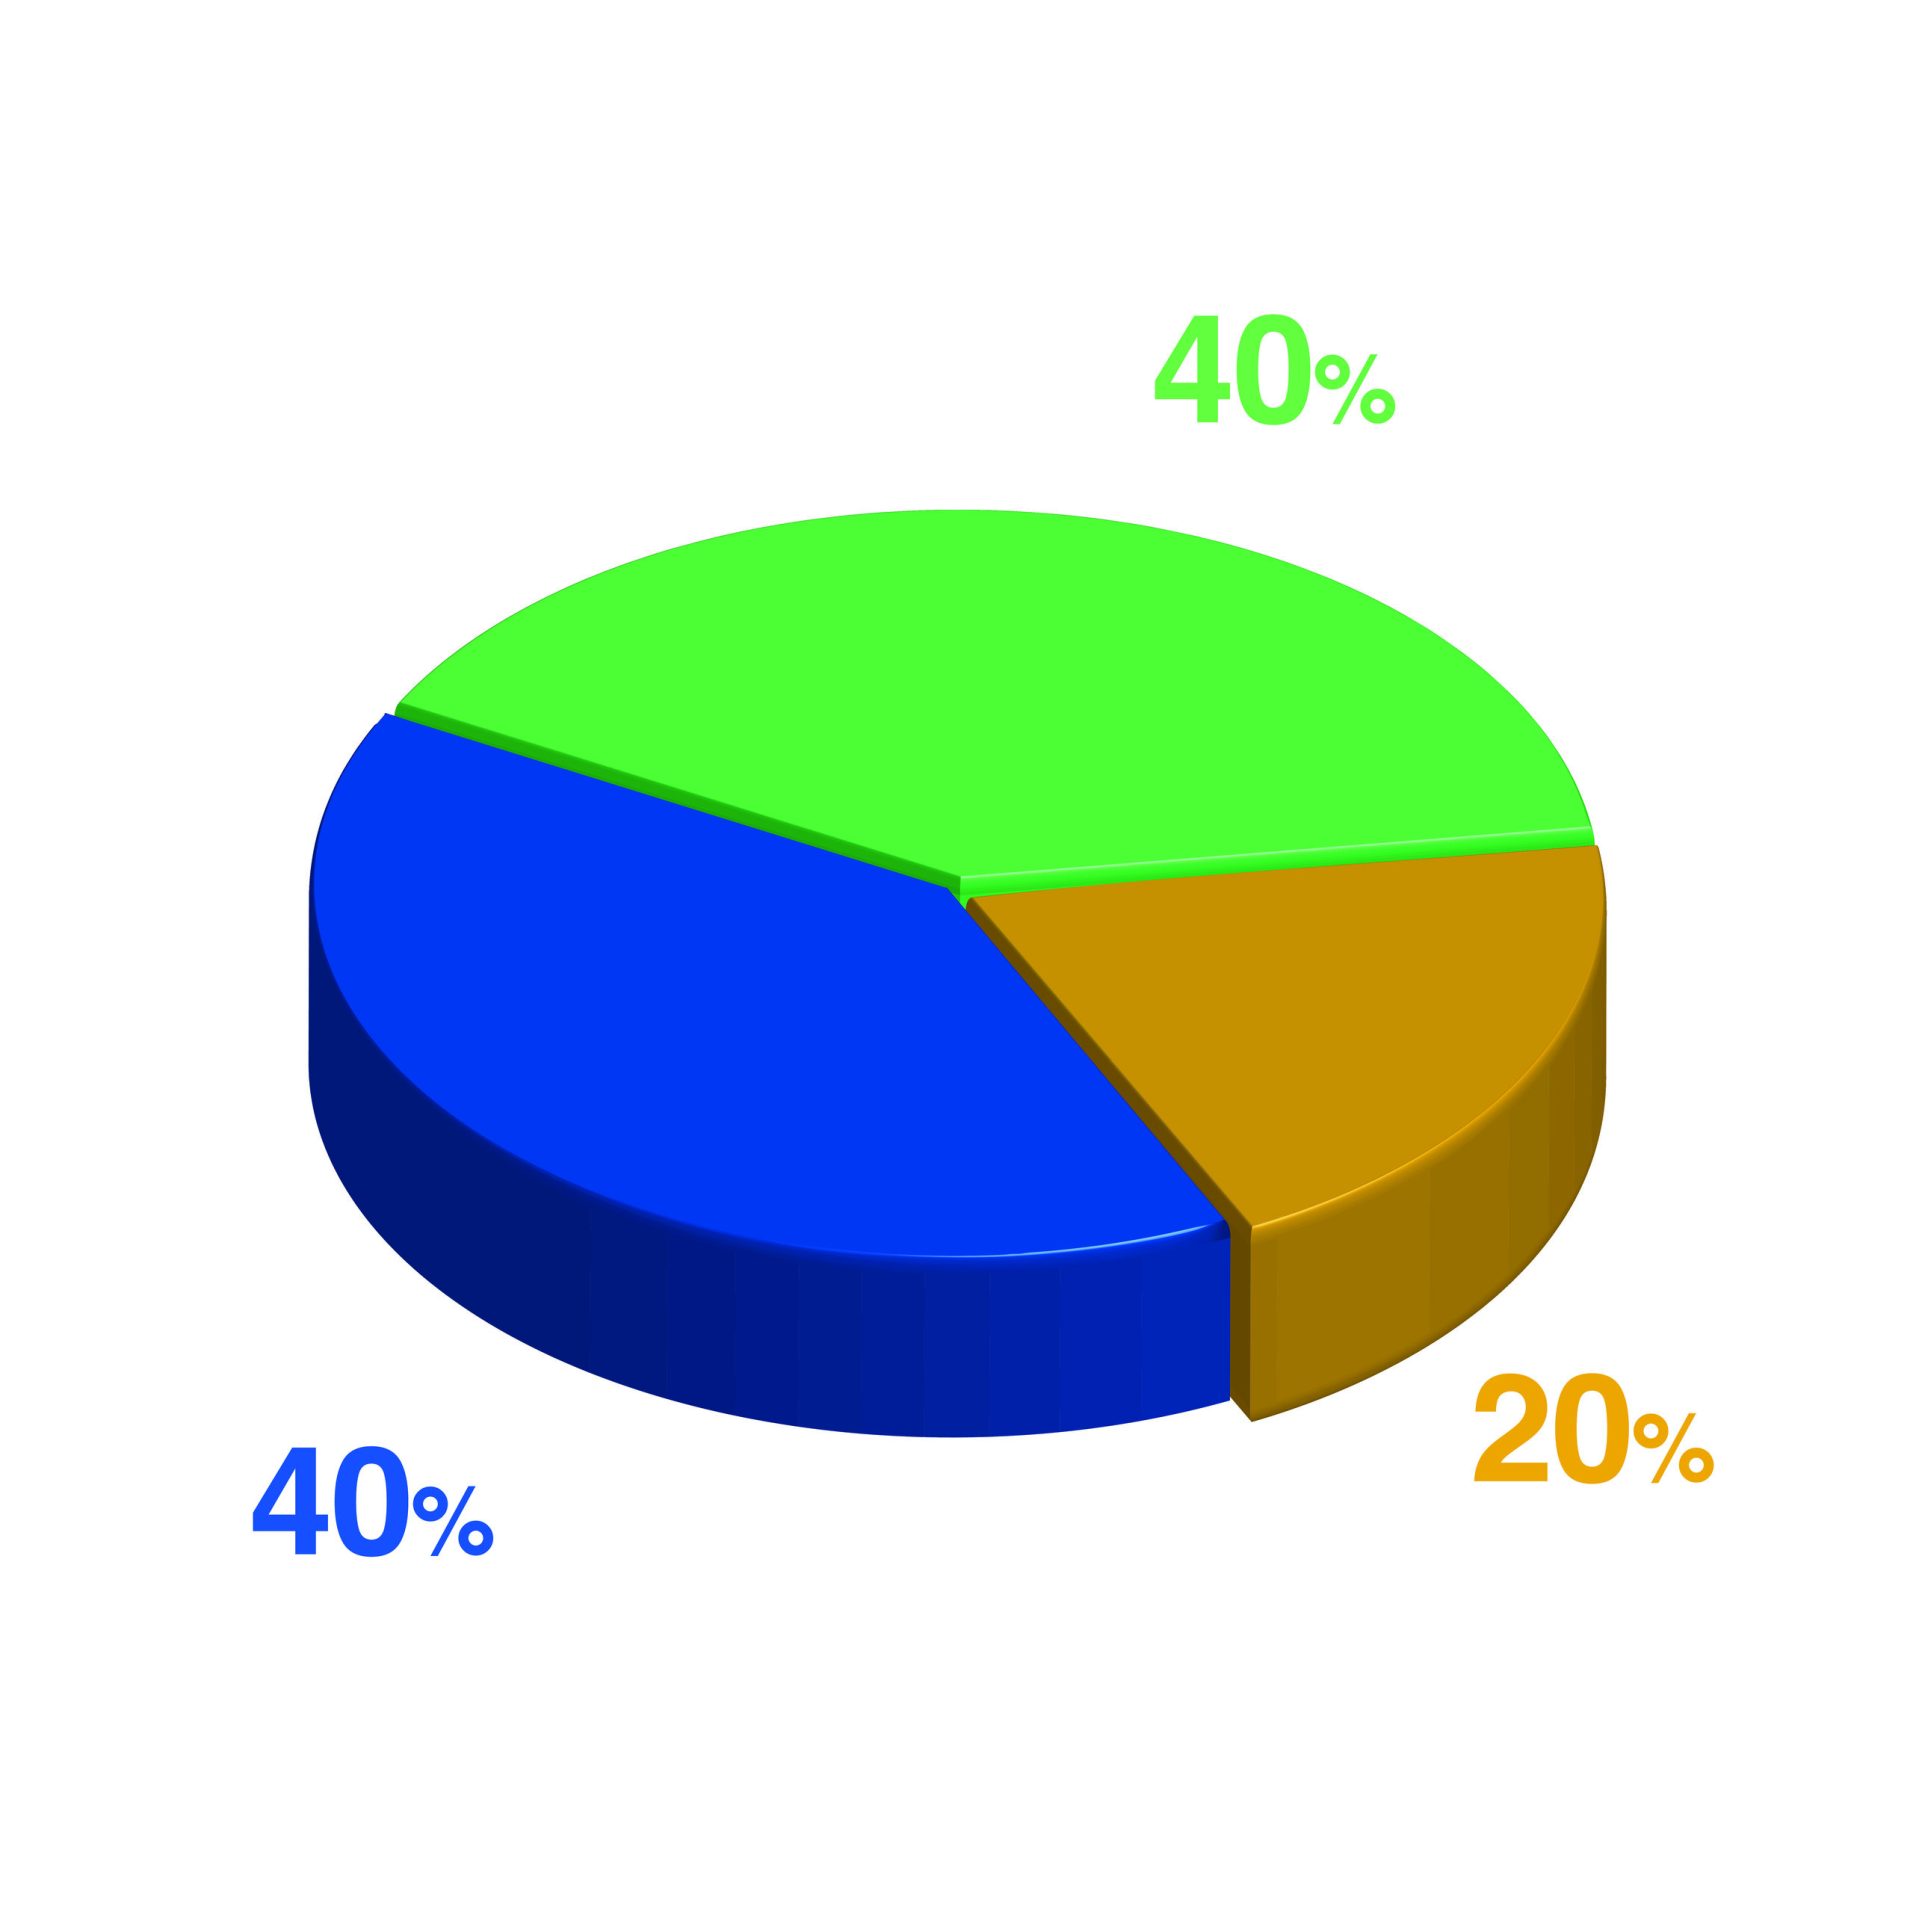 image of pie chart showing 40, 40 and 20 sections